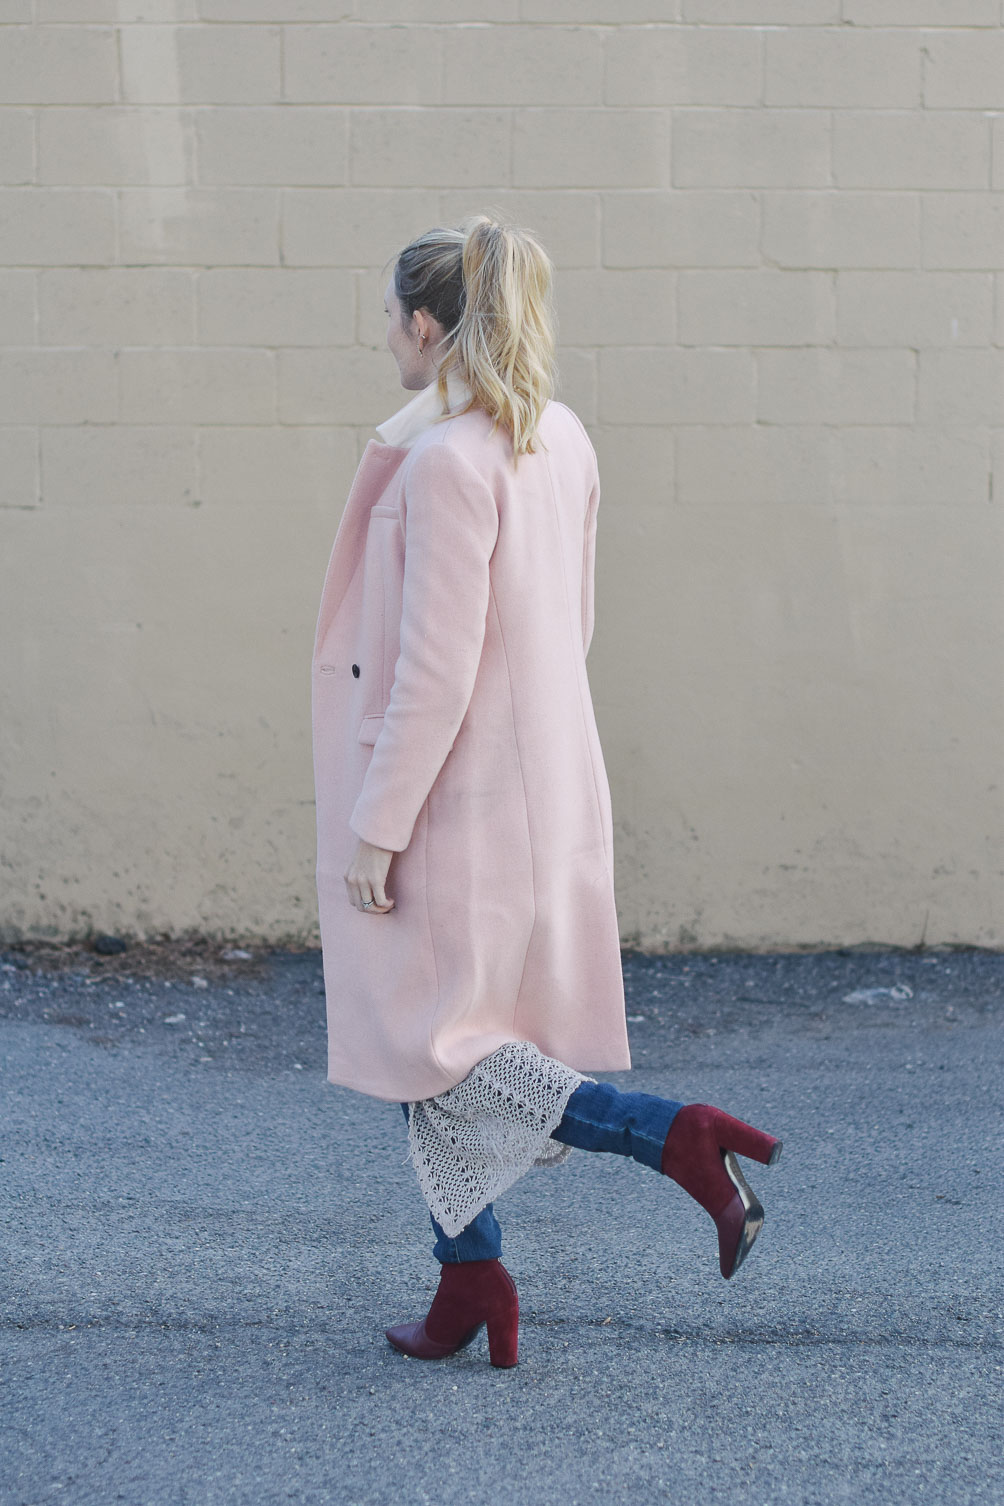 styling pink ombre layers for winter with a duster sweater, maternity jeans, and burgundy boots